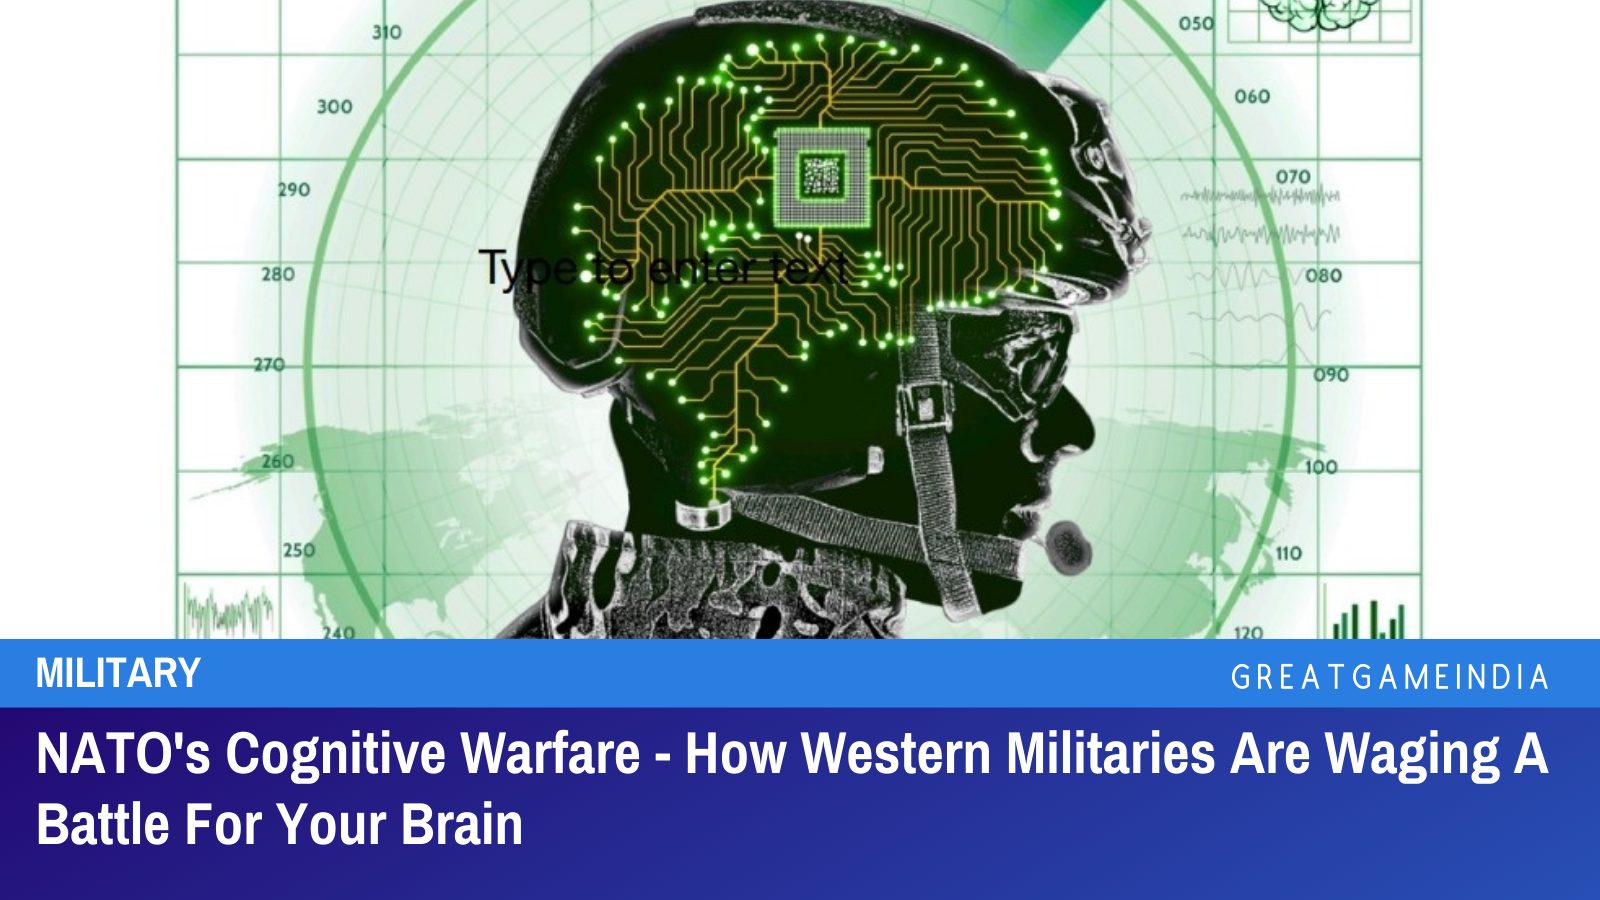 NATO’s Cognitive Warfare – How Western Militaries Are Waging A Battle For Your Brain